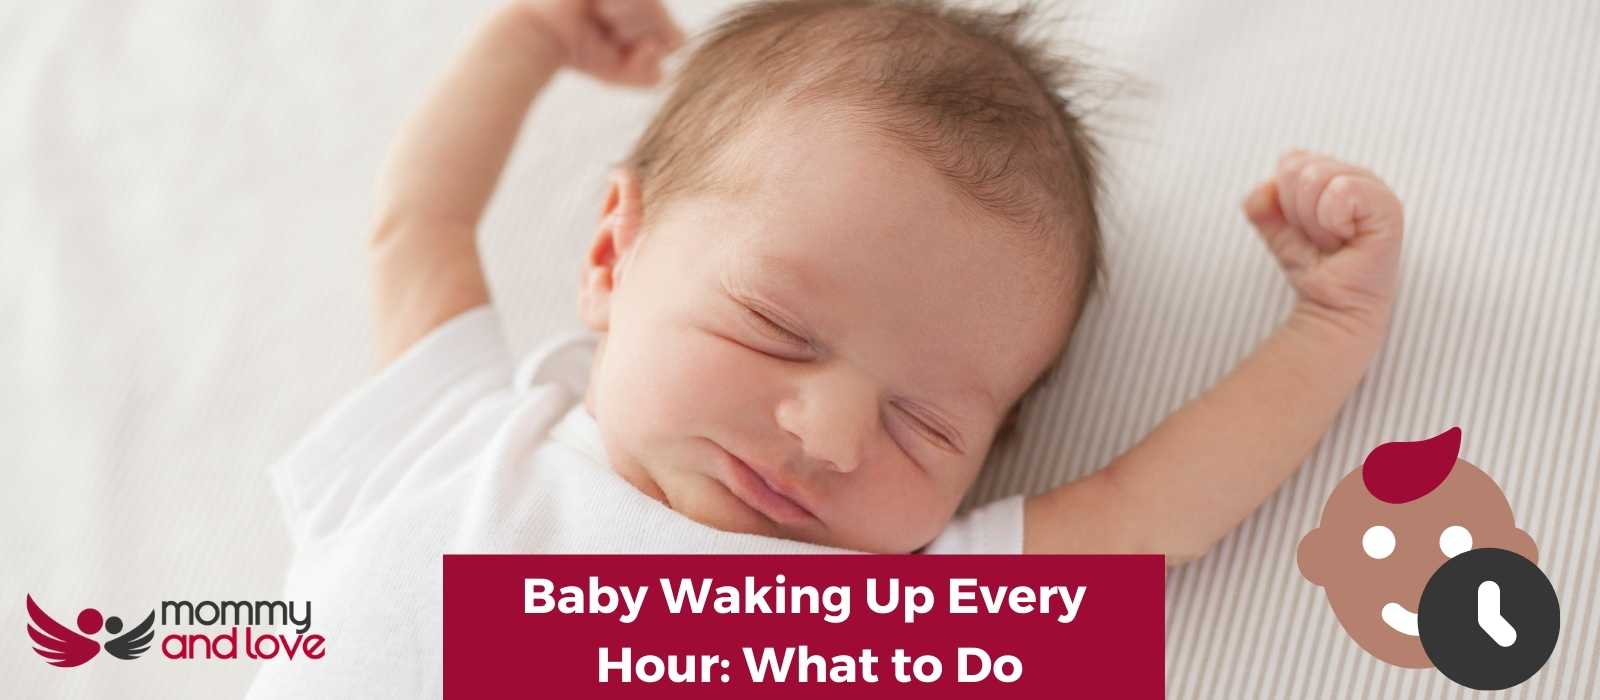 Baby Waking Up Every Hour: What to Do